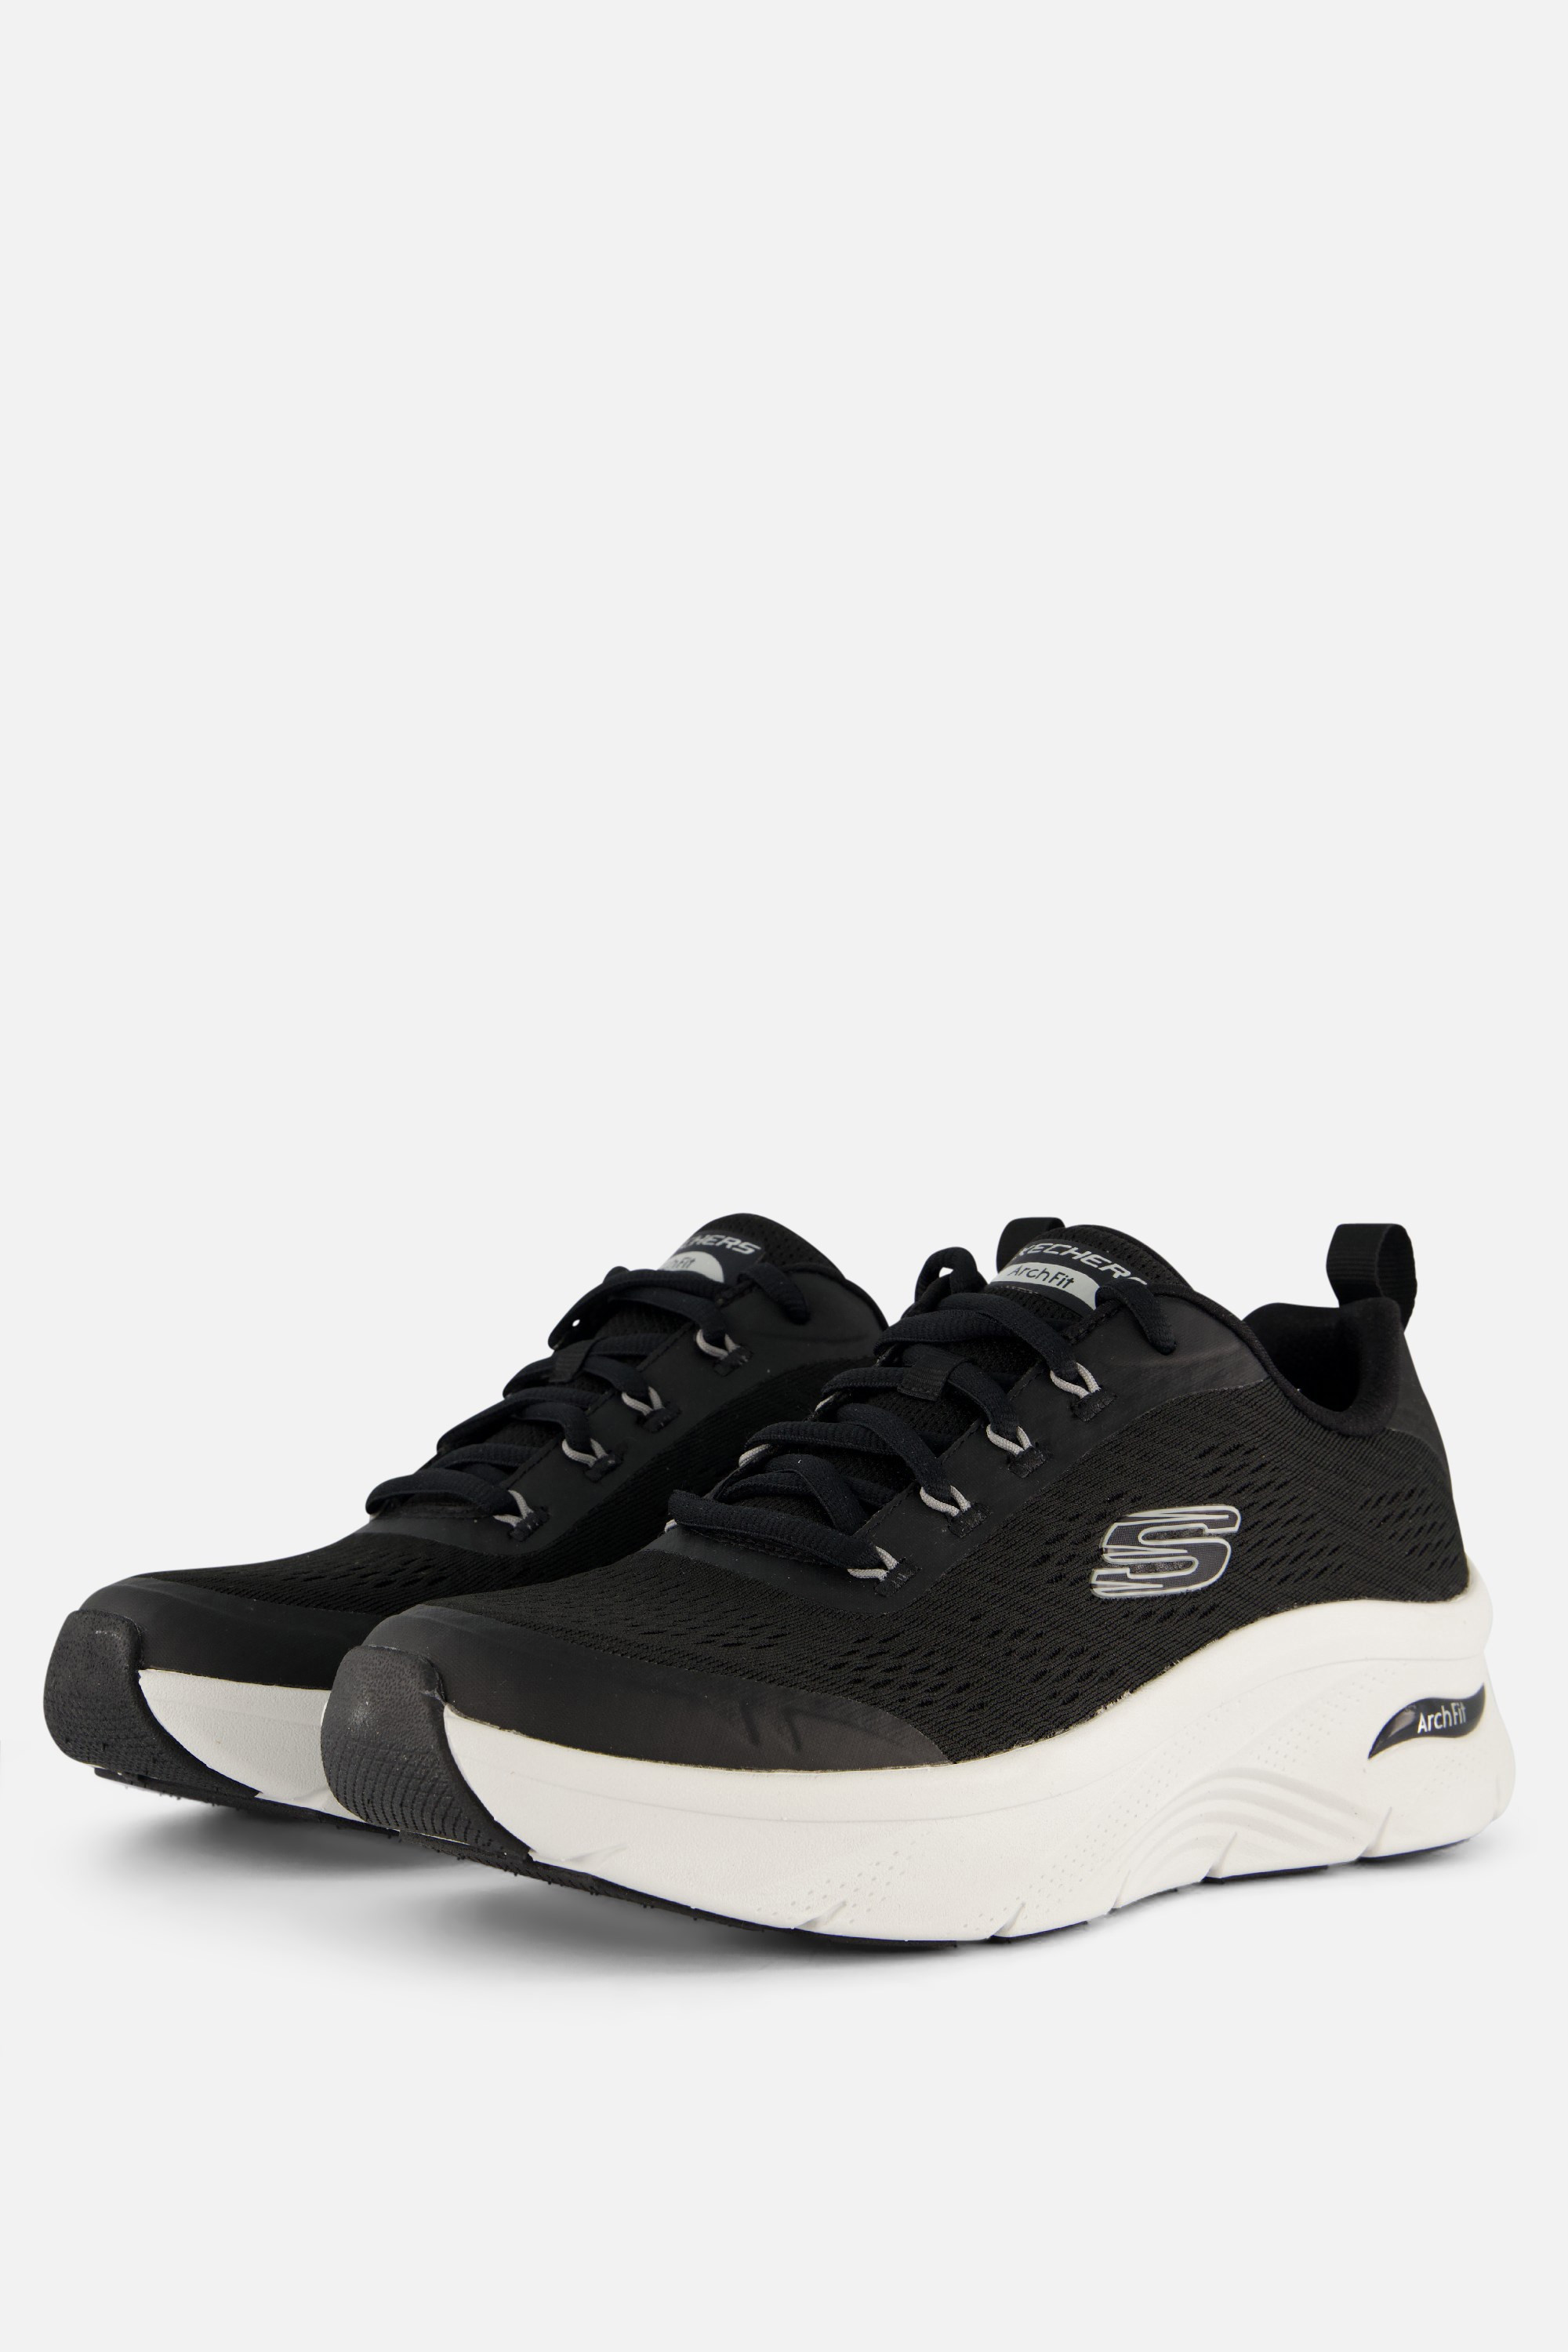 Skechers Skechers Relaxed Fit- Arch Fit D'lux-Sumner